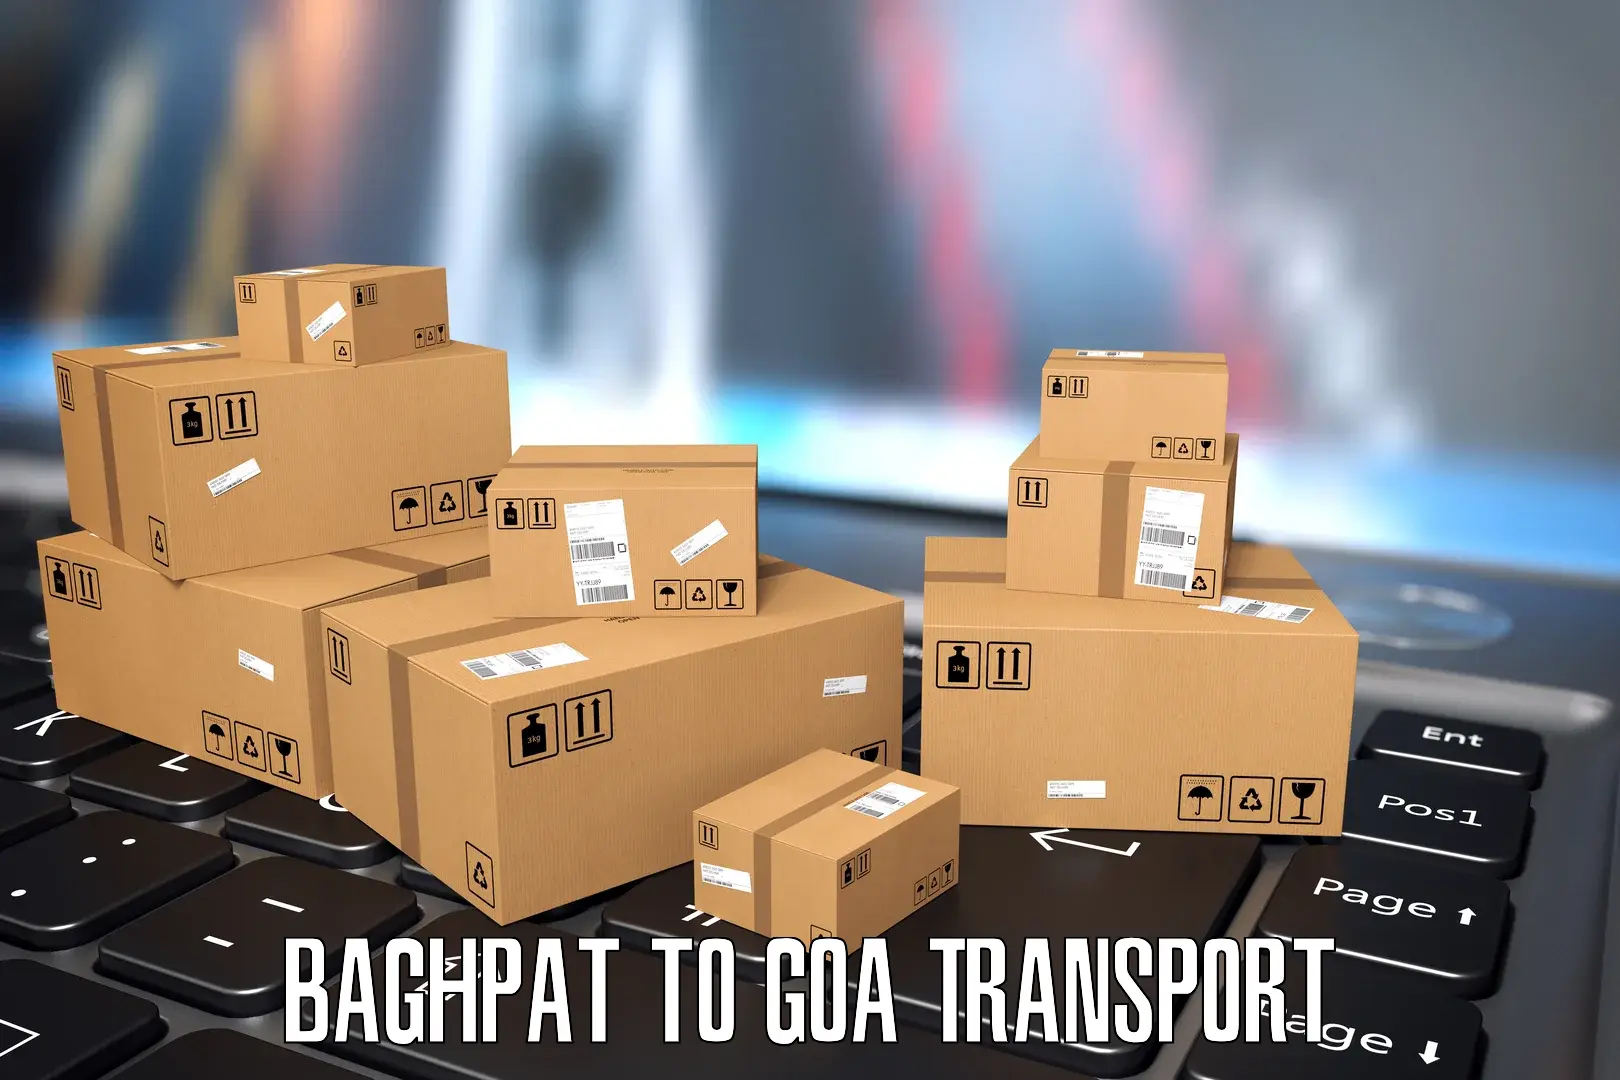 Commercial transport service Baghpat to Bicholim